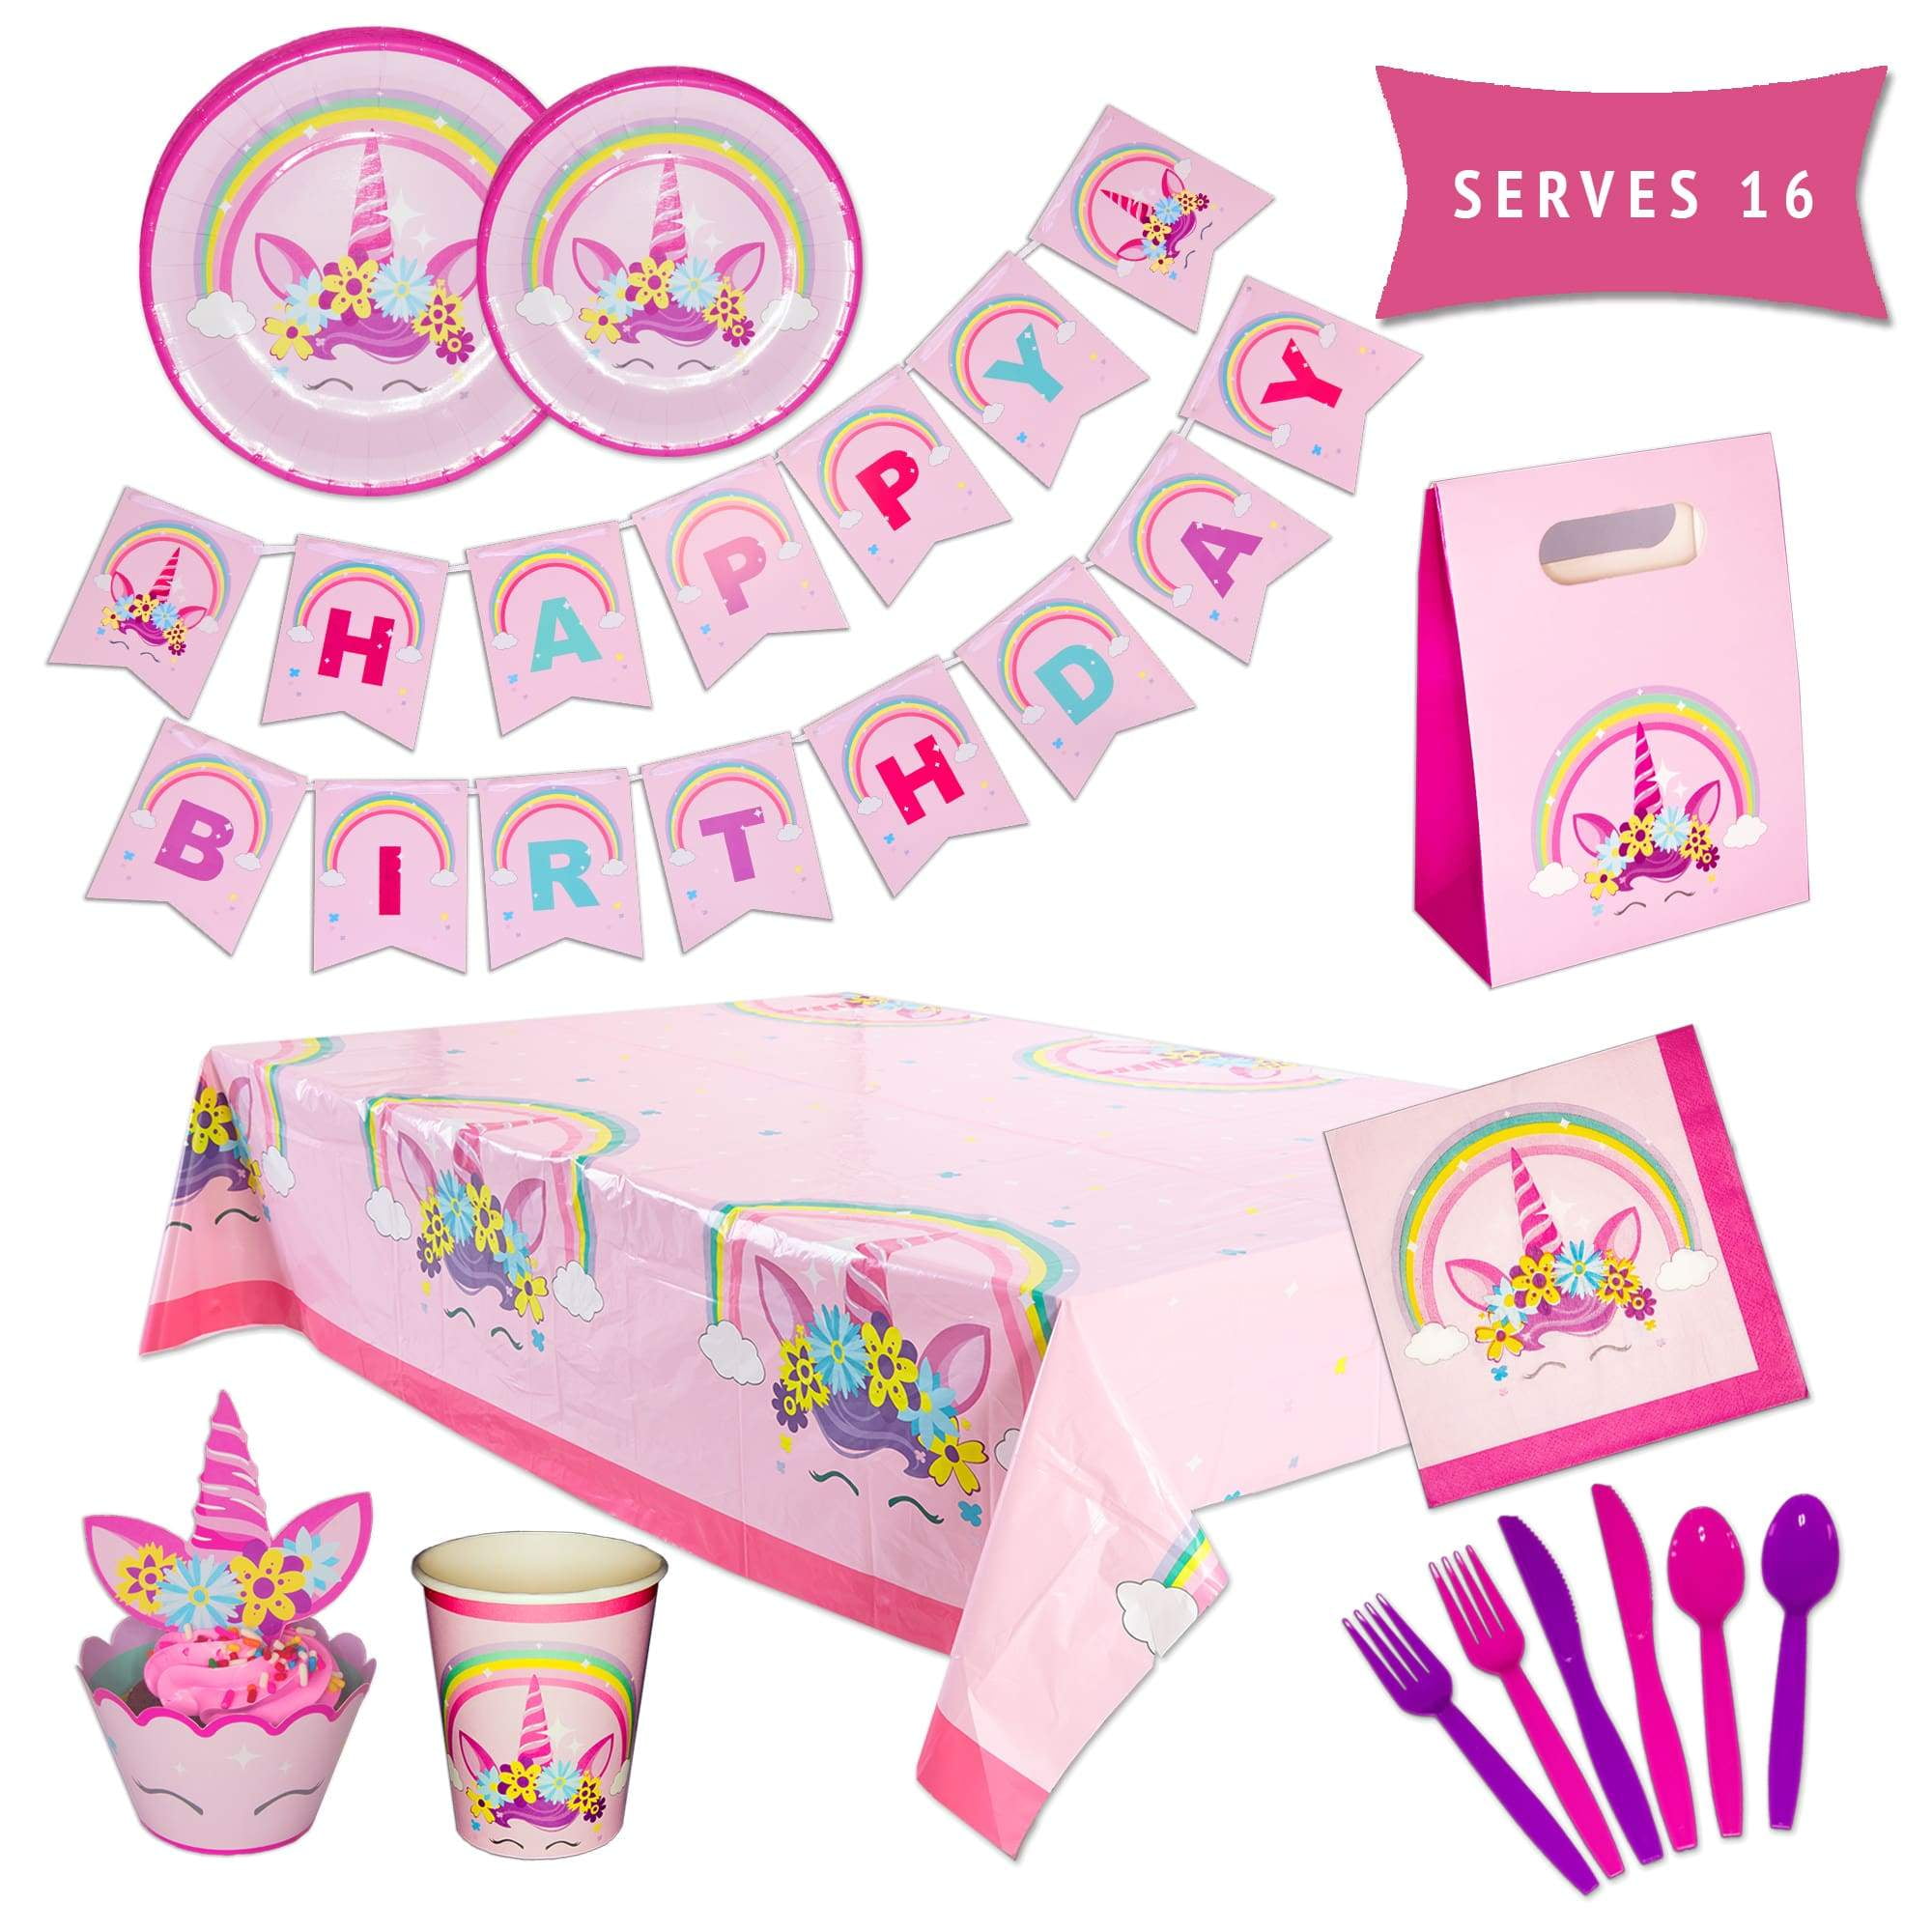 36 Piece Unicorn Theme Birthday Party Favor Bundle and Activity Kit for Kids Parties or Classroom Mixed